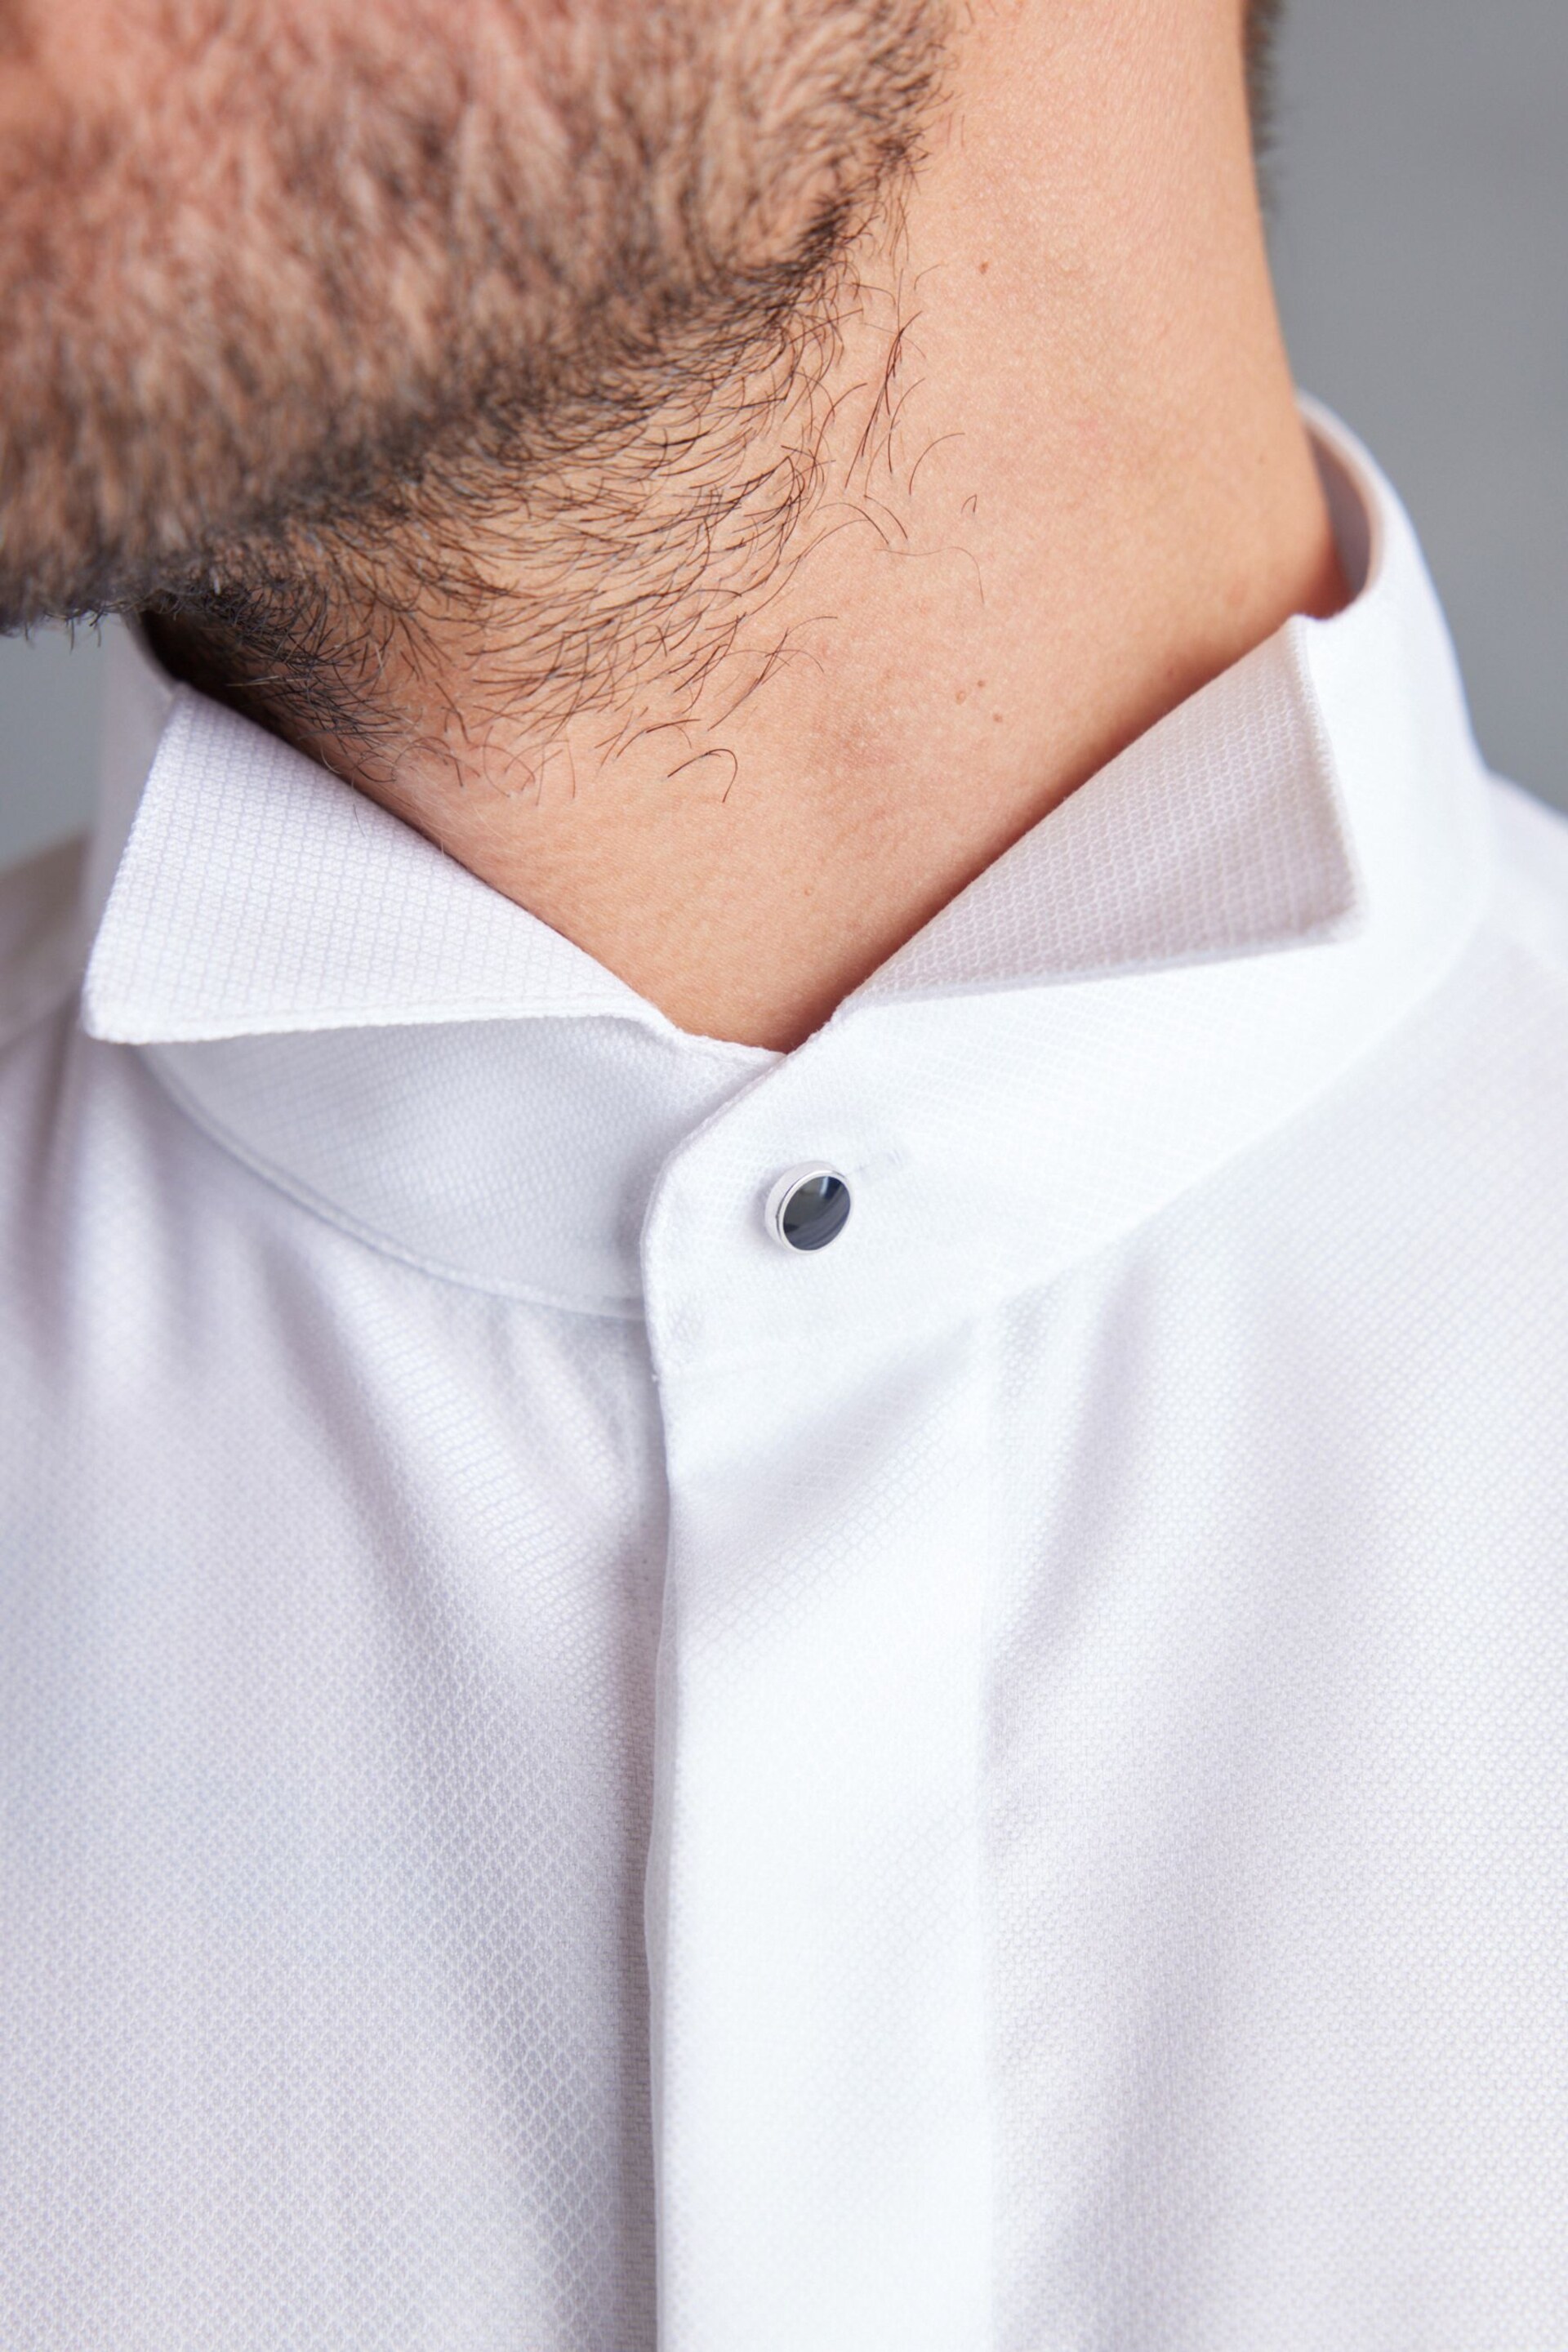 White Signature Canclini Made In Italy Double Cuff Shirt - Image 3 of 5